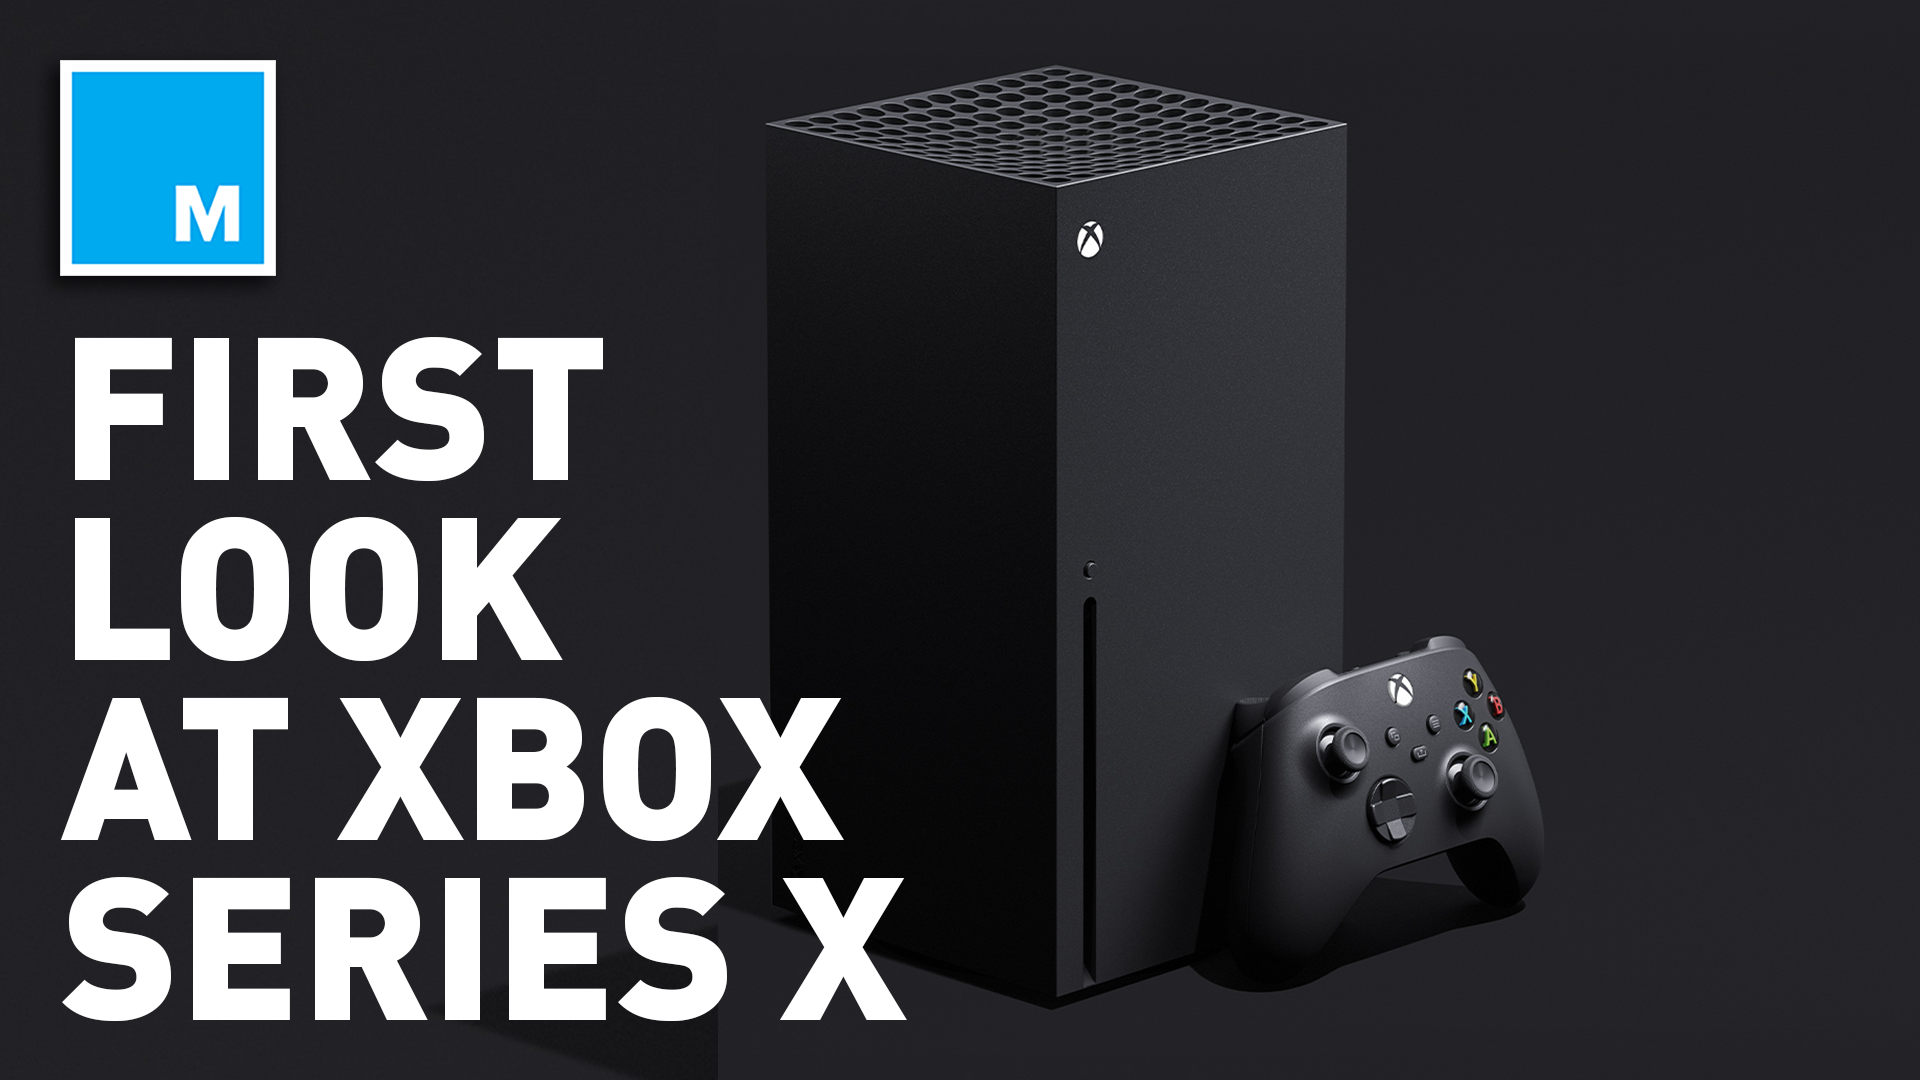 Xbox Series X Specification and price